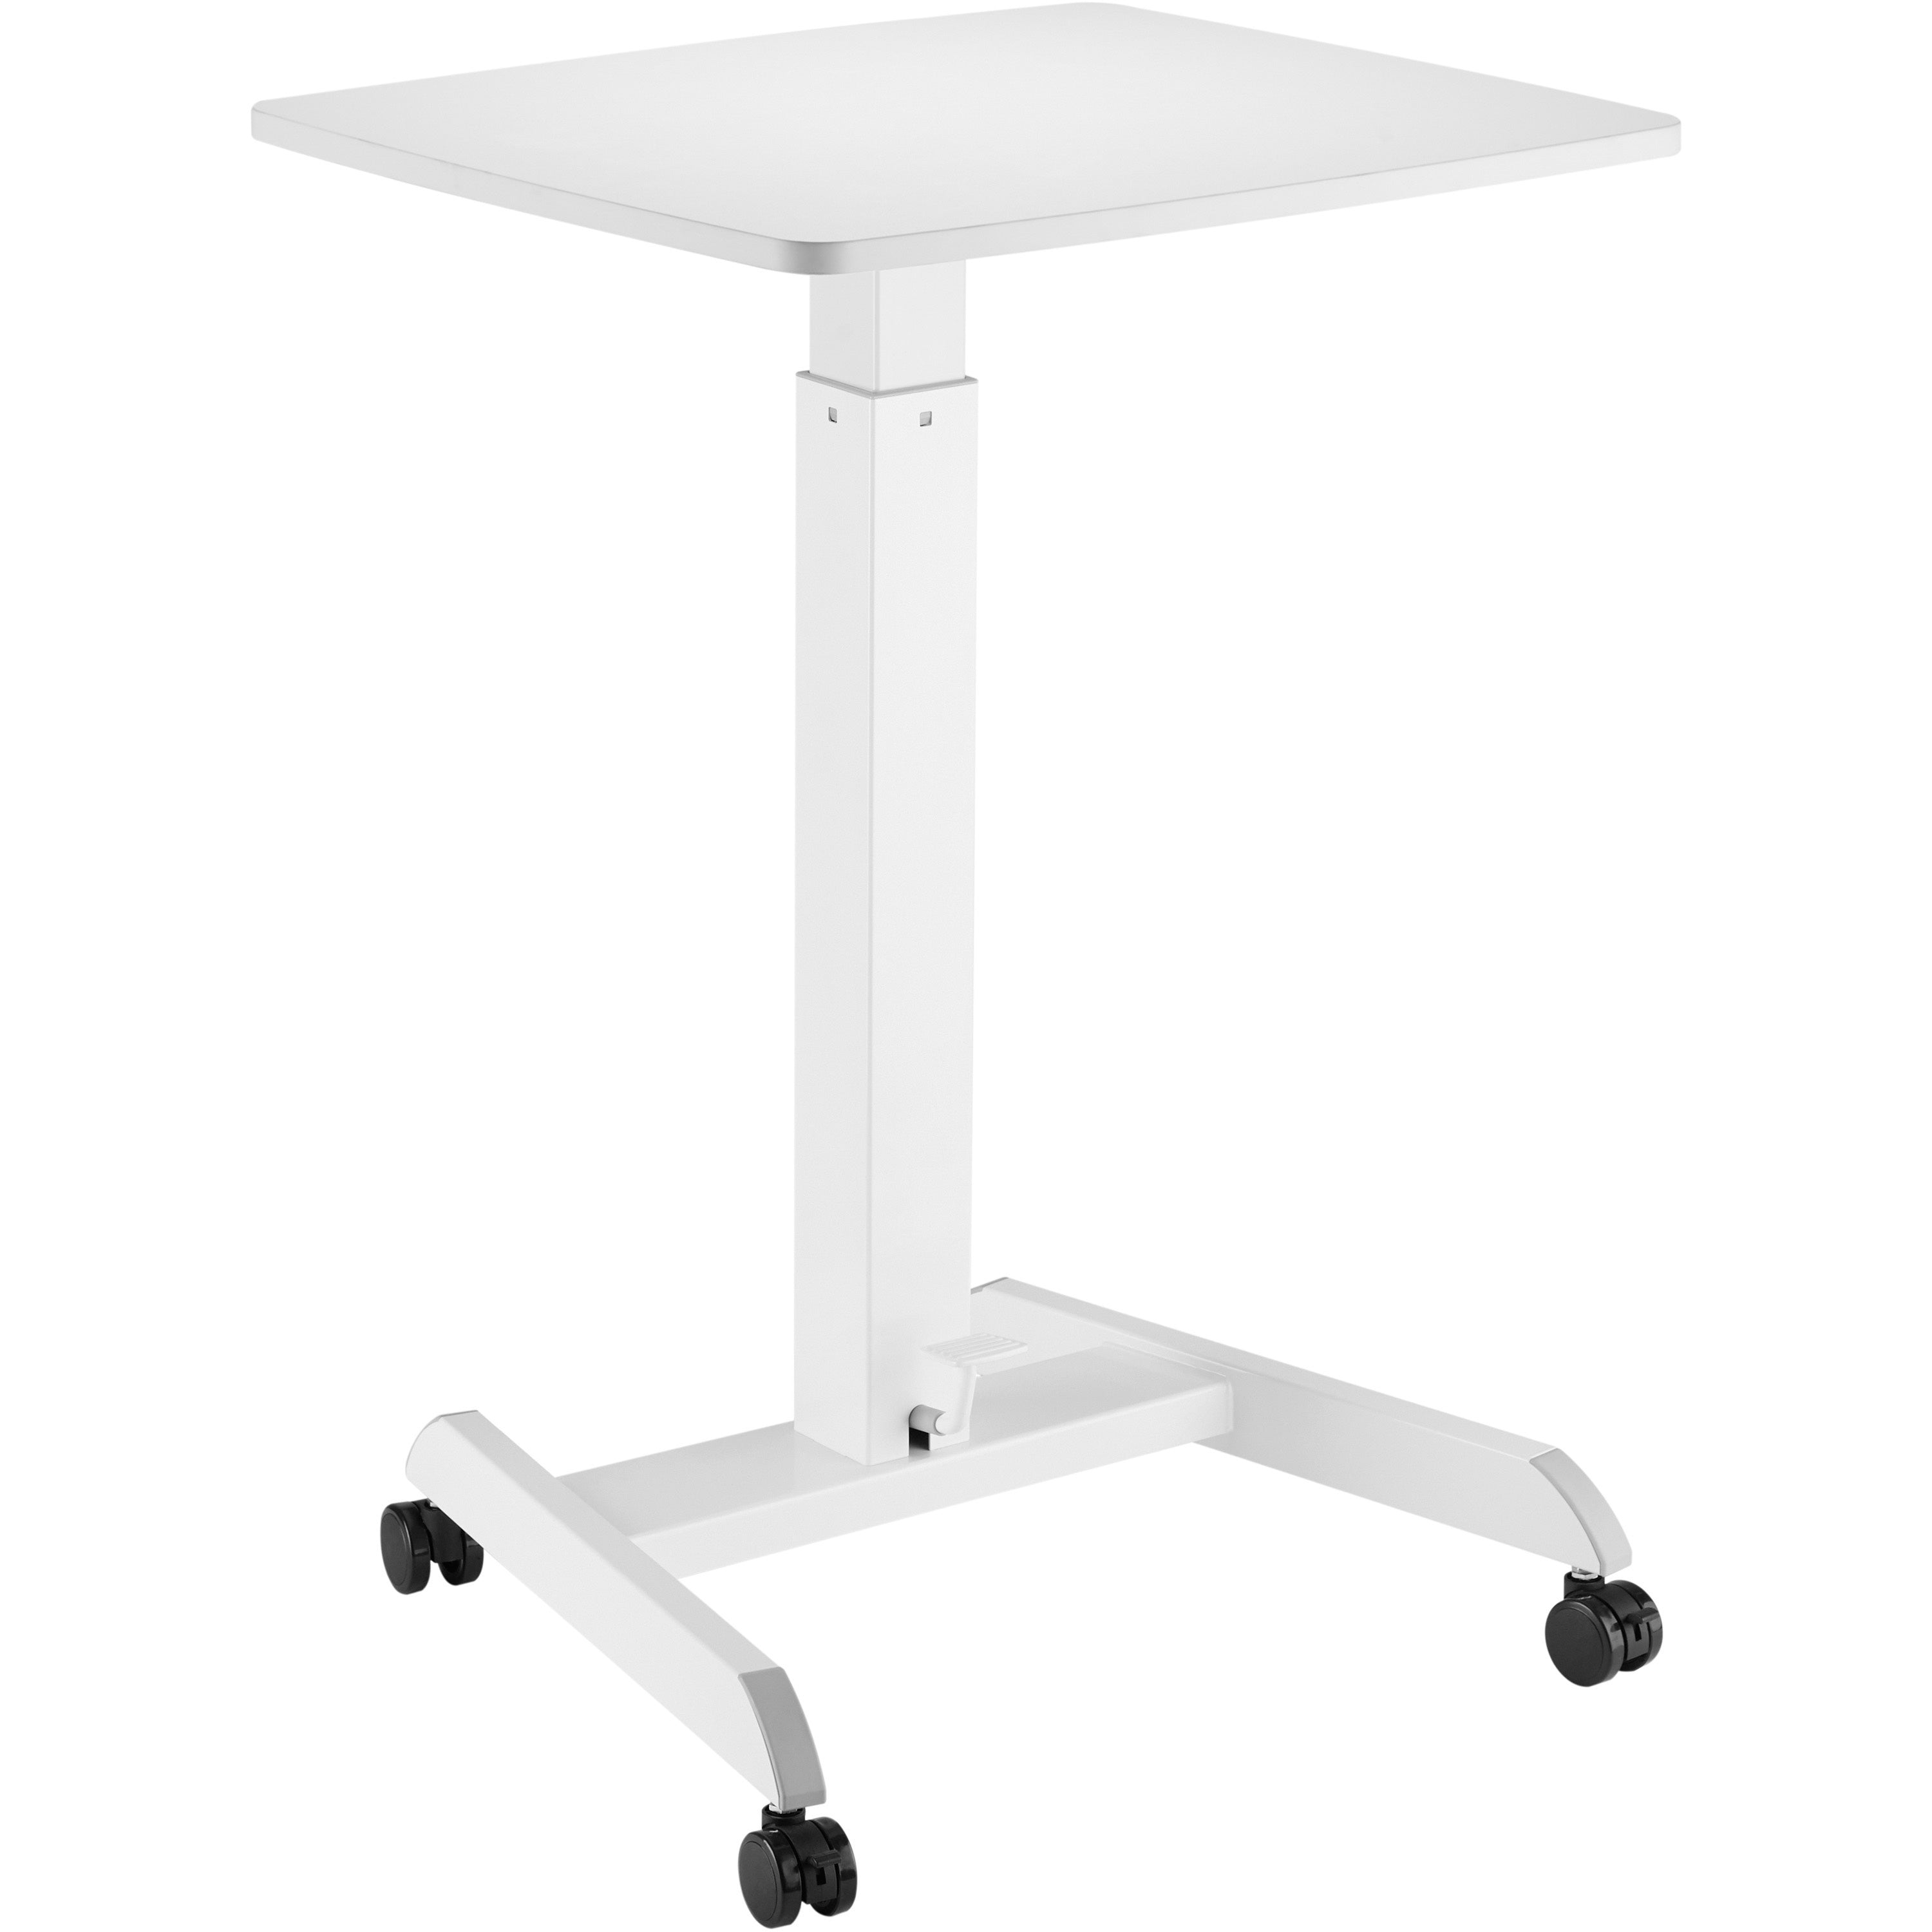 kantek-mobile-height-adjustable-sit-to-stand-desk-for-table-toprectangle-top-1760-lb-capacity-adjustable-height-2960-to-4420-adjustment-x-2360-table-top-width-x-2050-table-top-depth-4420-height-x-2360-width-x-2050-depth-a_ktksts300w - 1